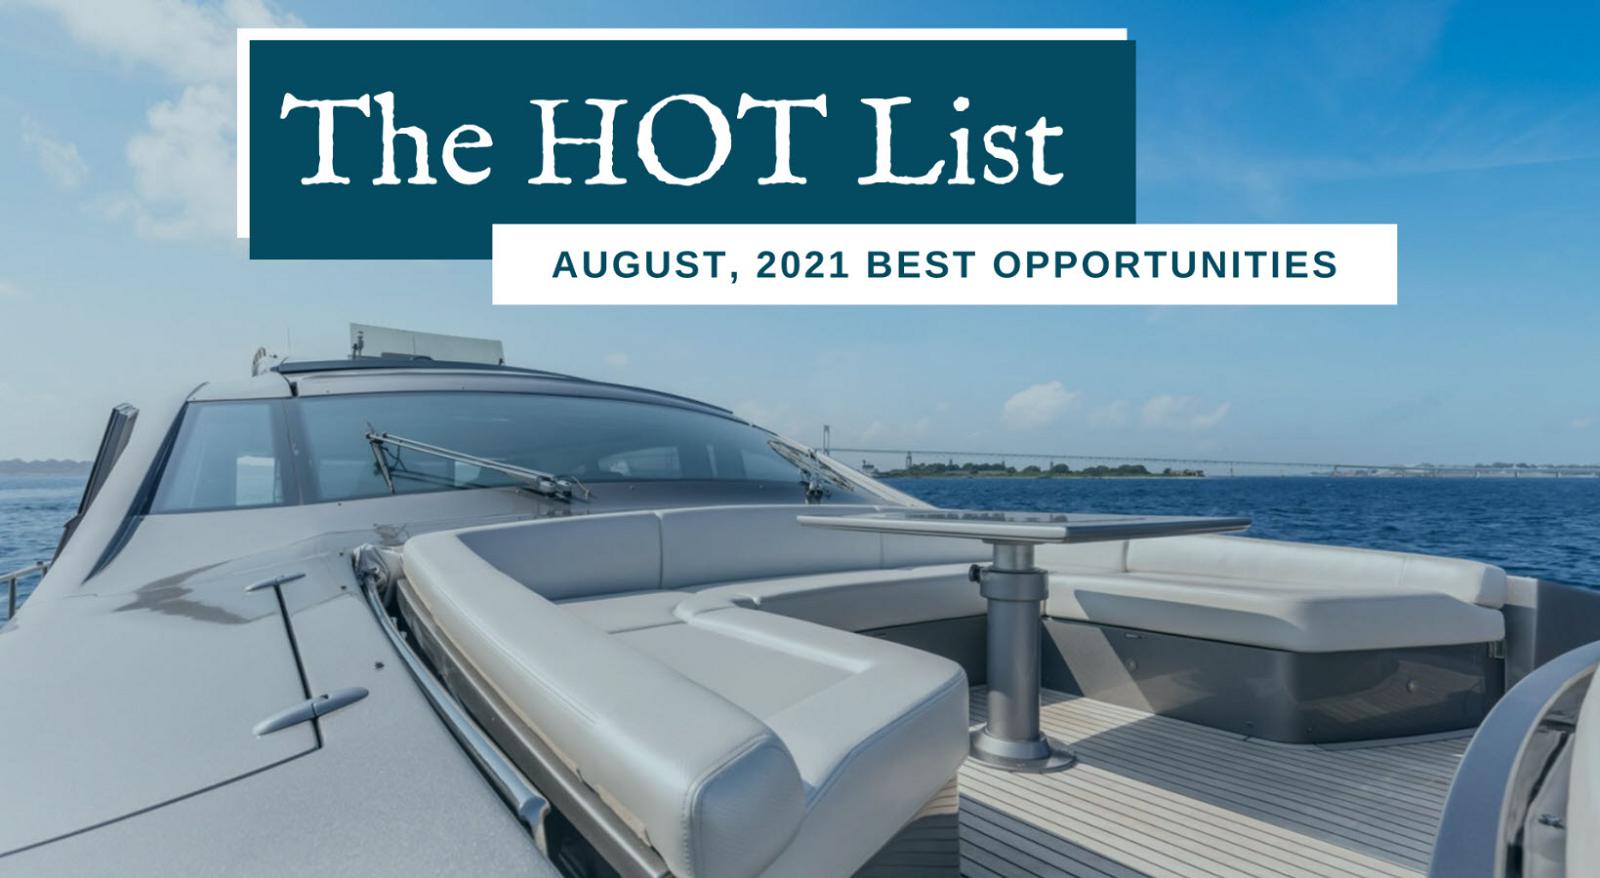 photo of The Hot List - August 2021